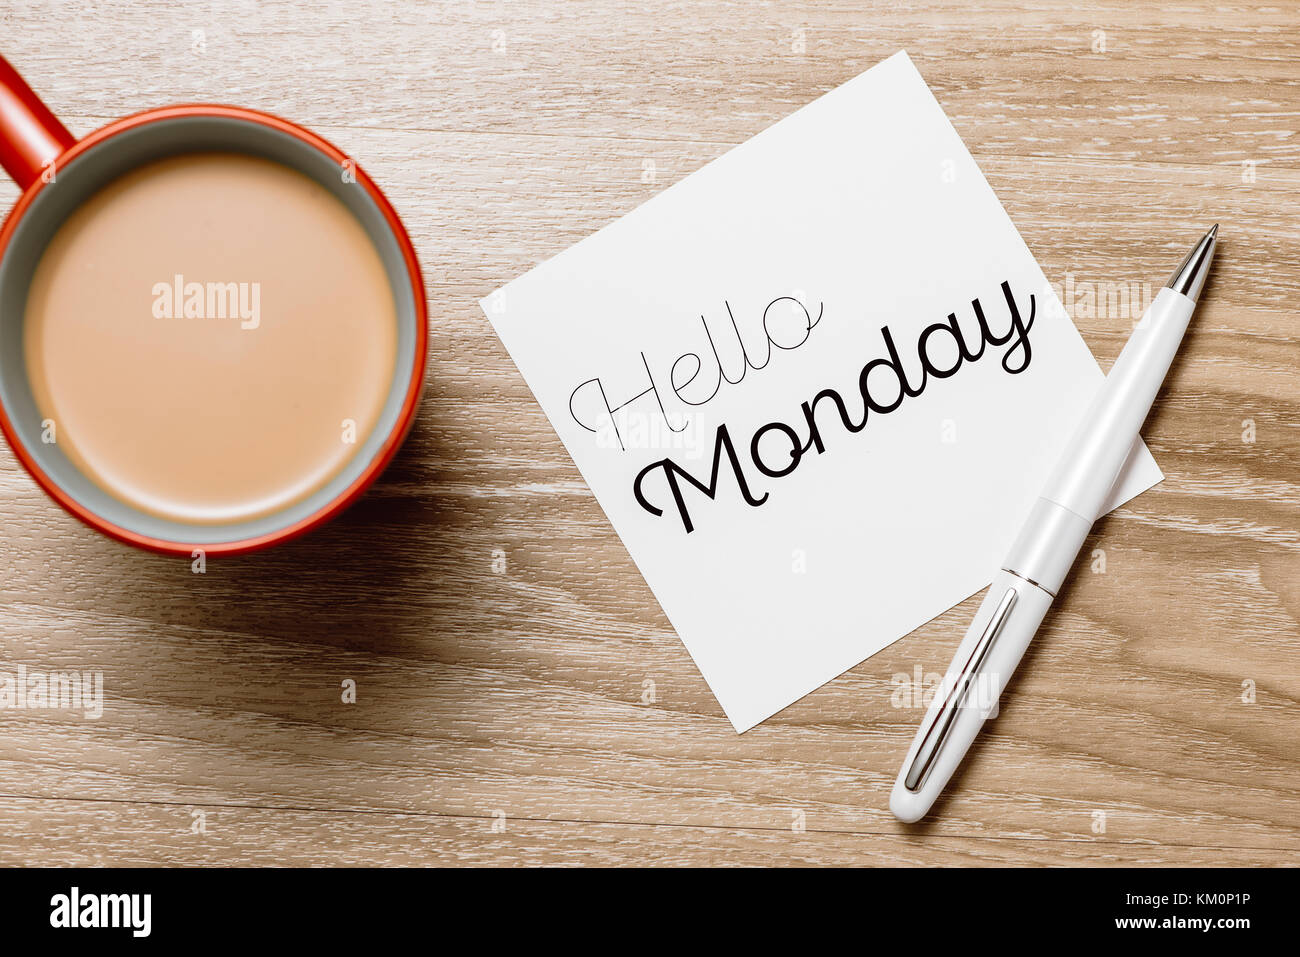 Good morning Monday - cheerful message on a sticky note with a cup of coffee and pen Stock Photo